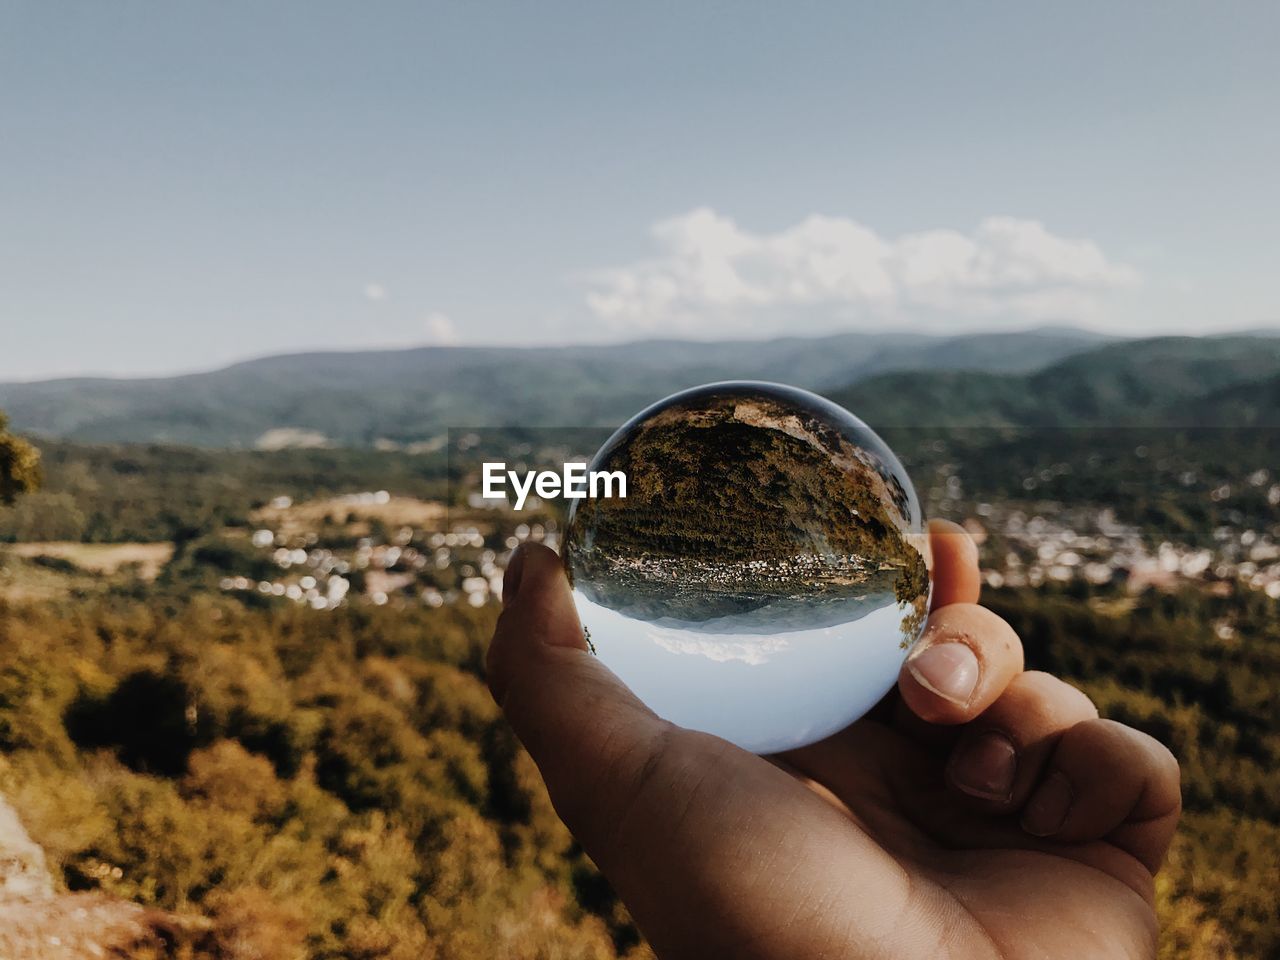 Cropped hand of person holding crystal ball on mountain against sky